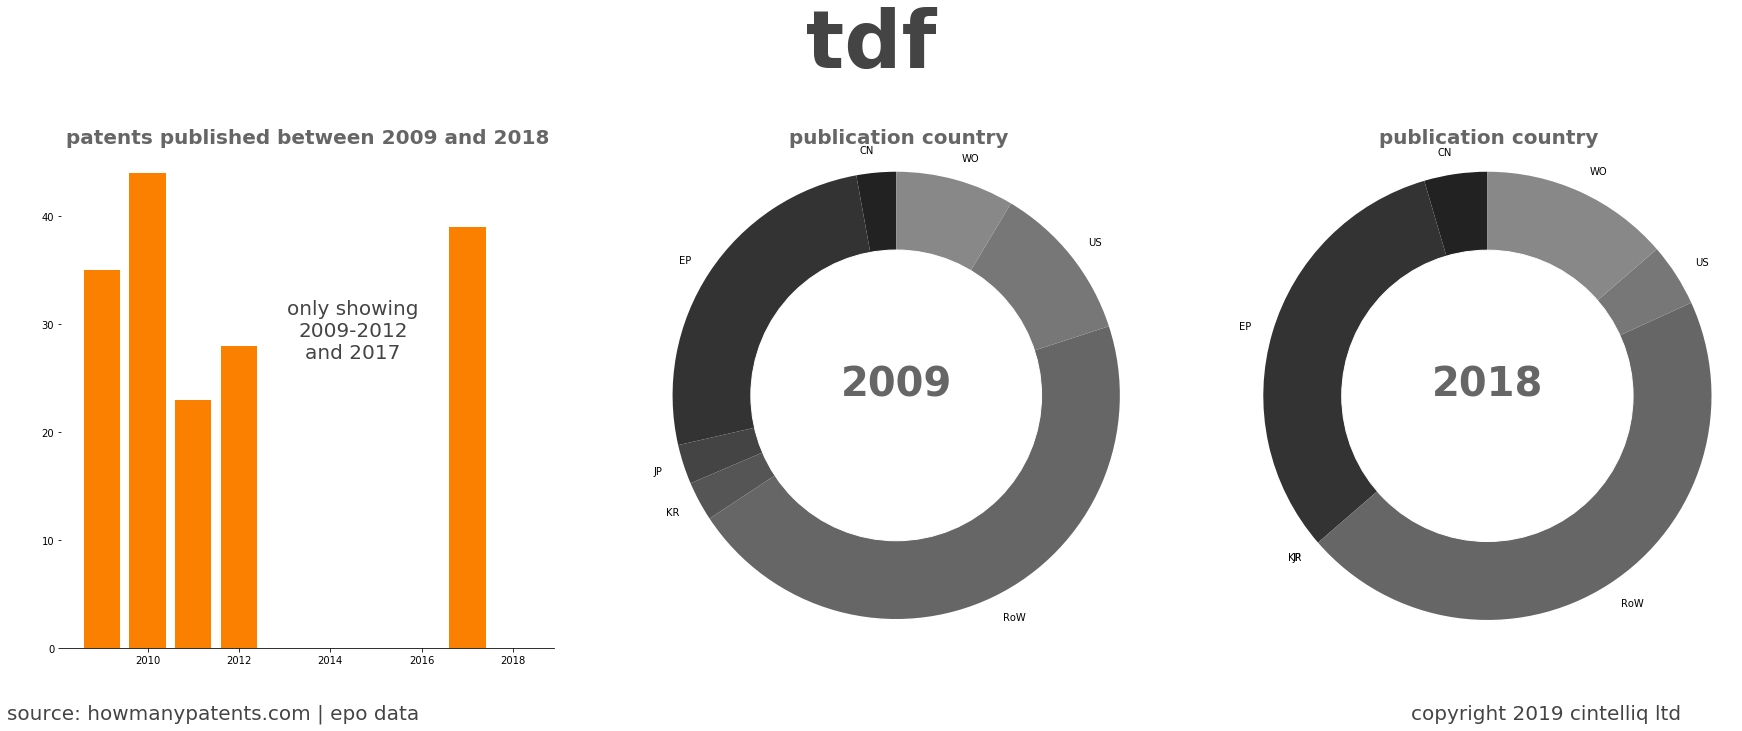 summary of patents for Tdf